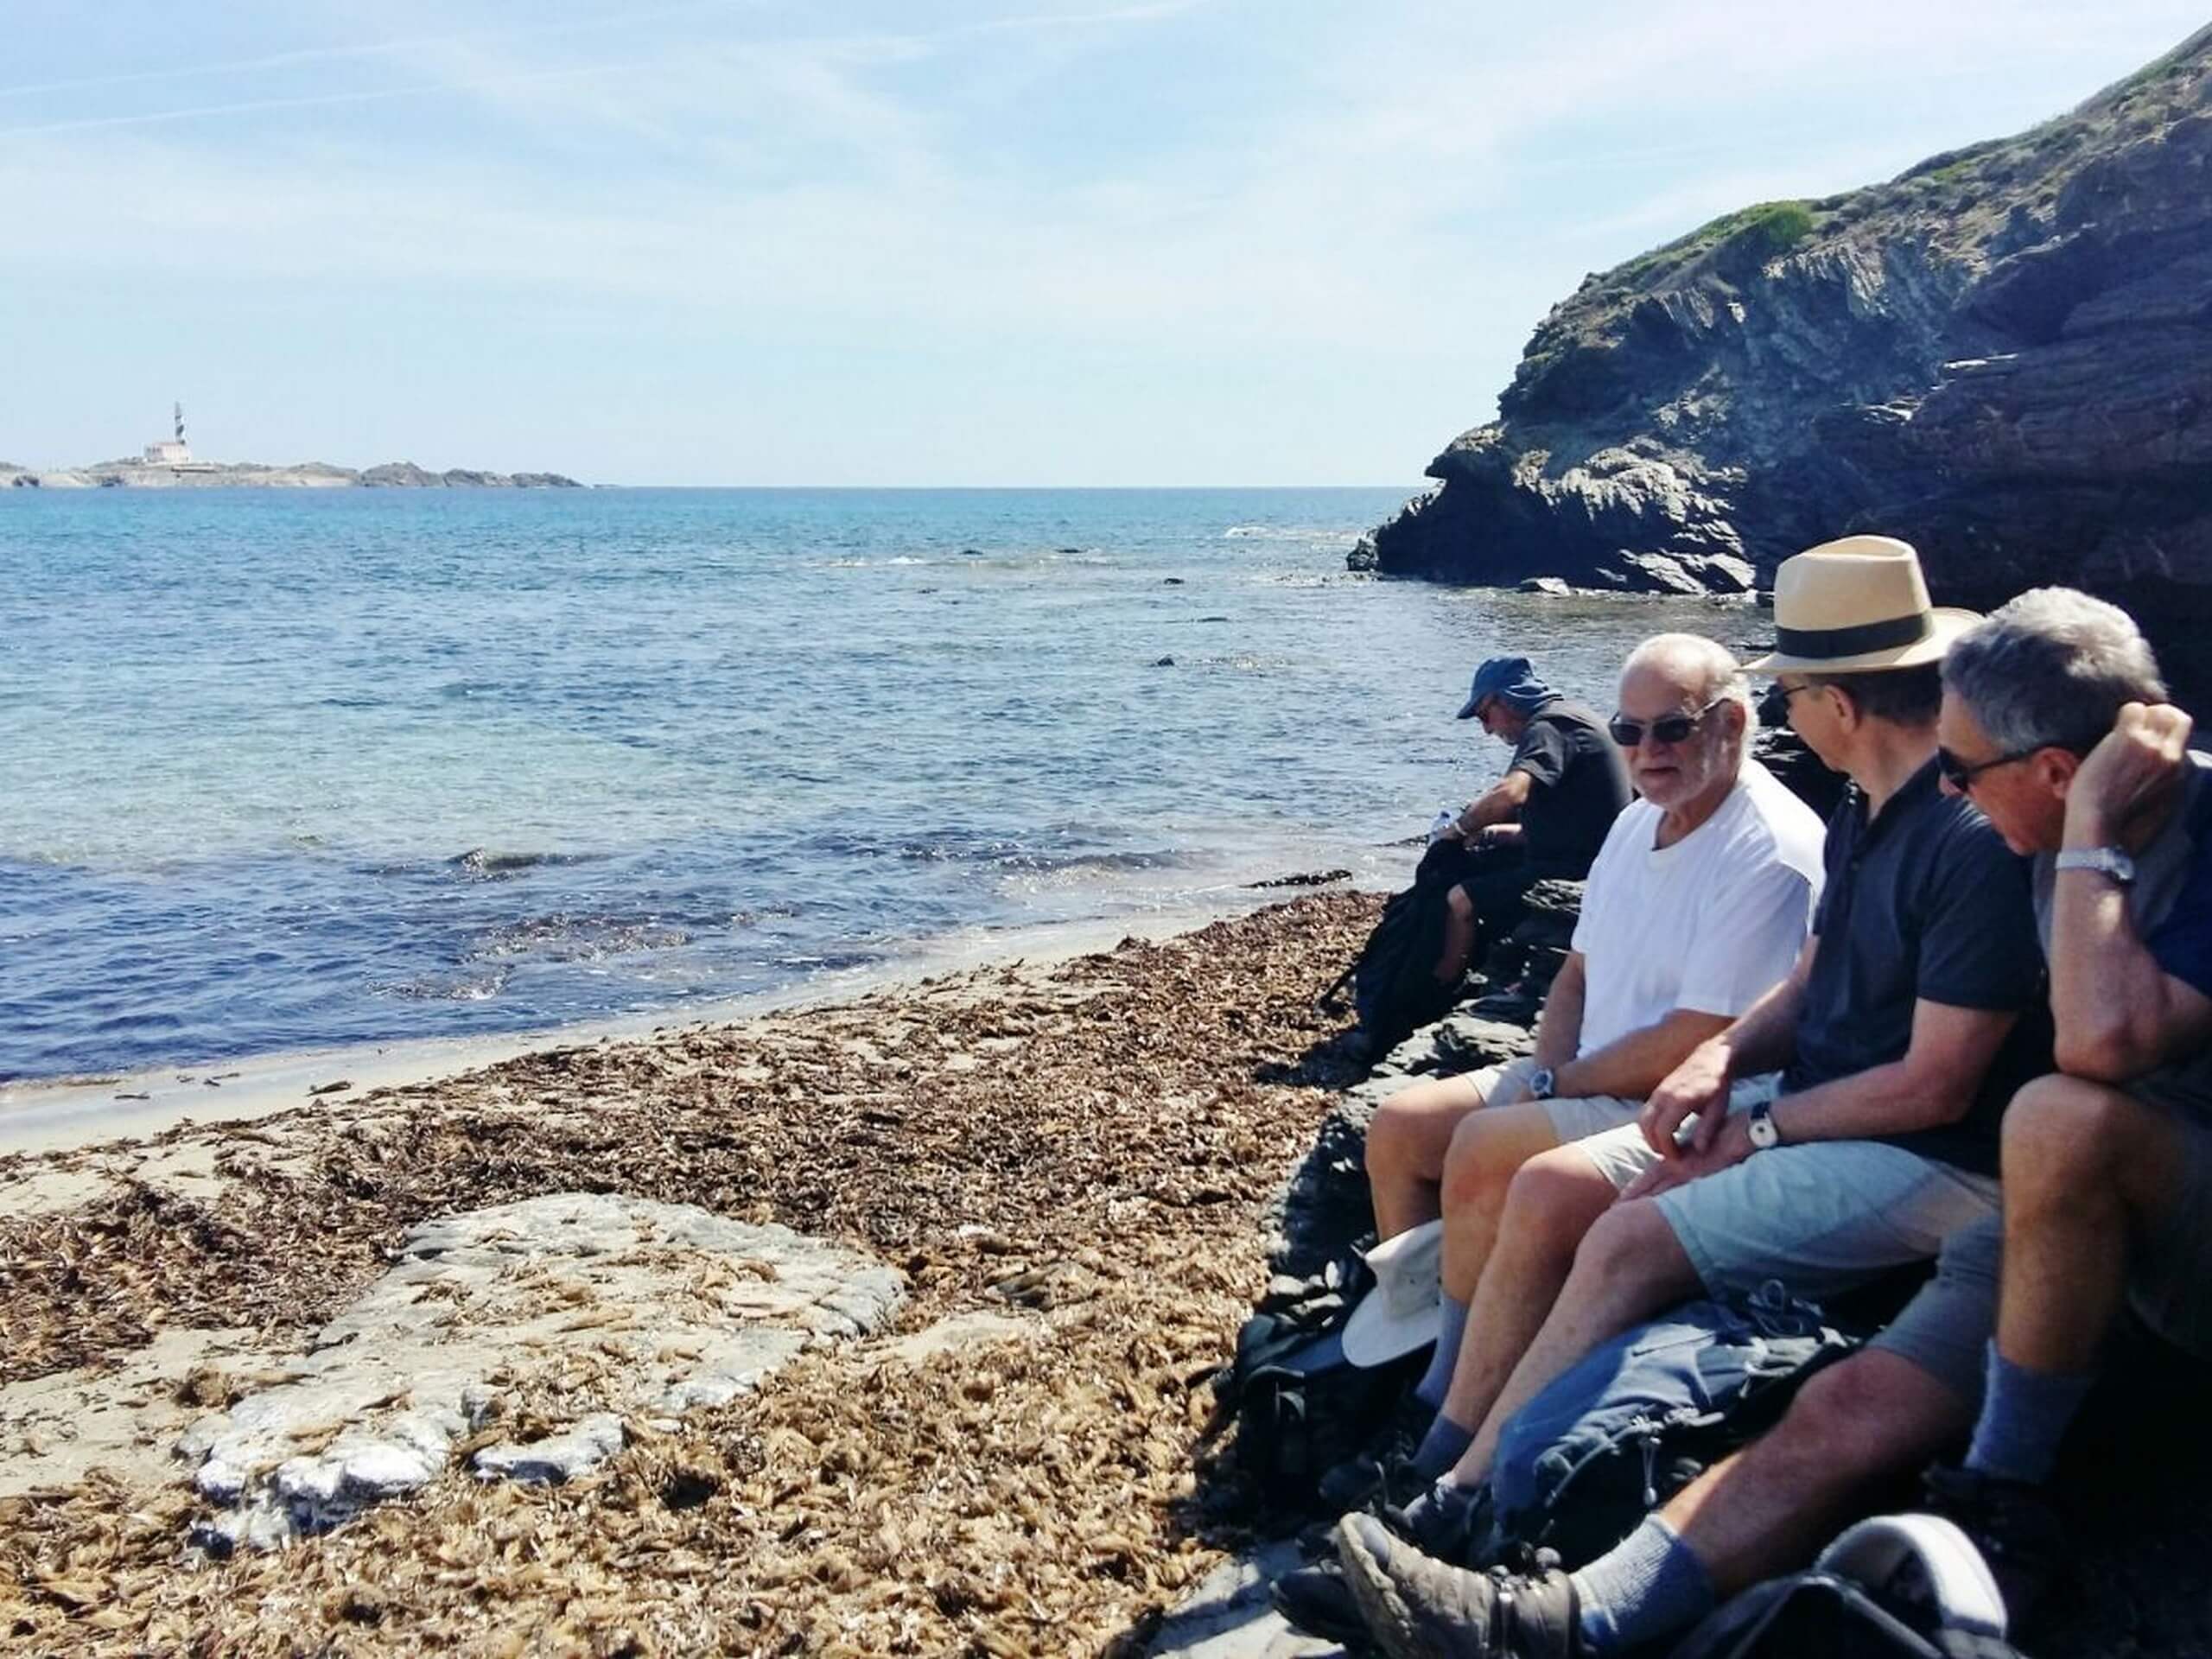 Group of hikers resting on the beach in Minorca